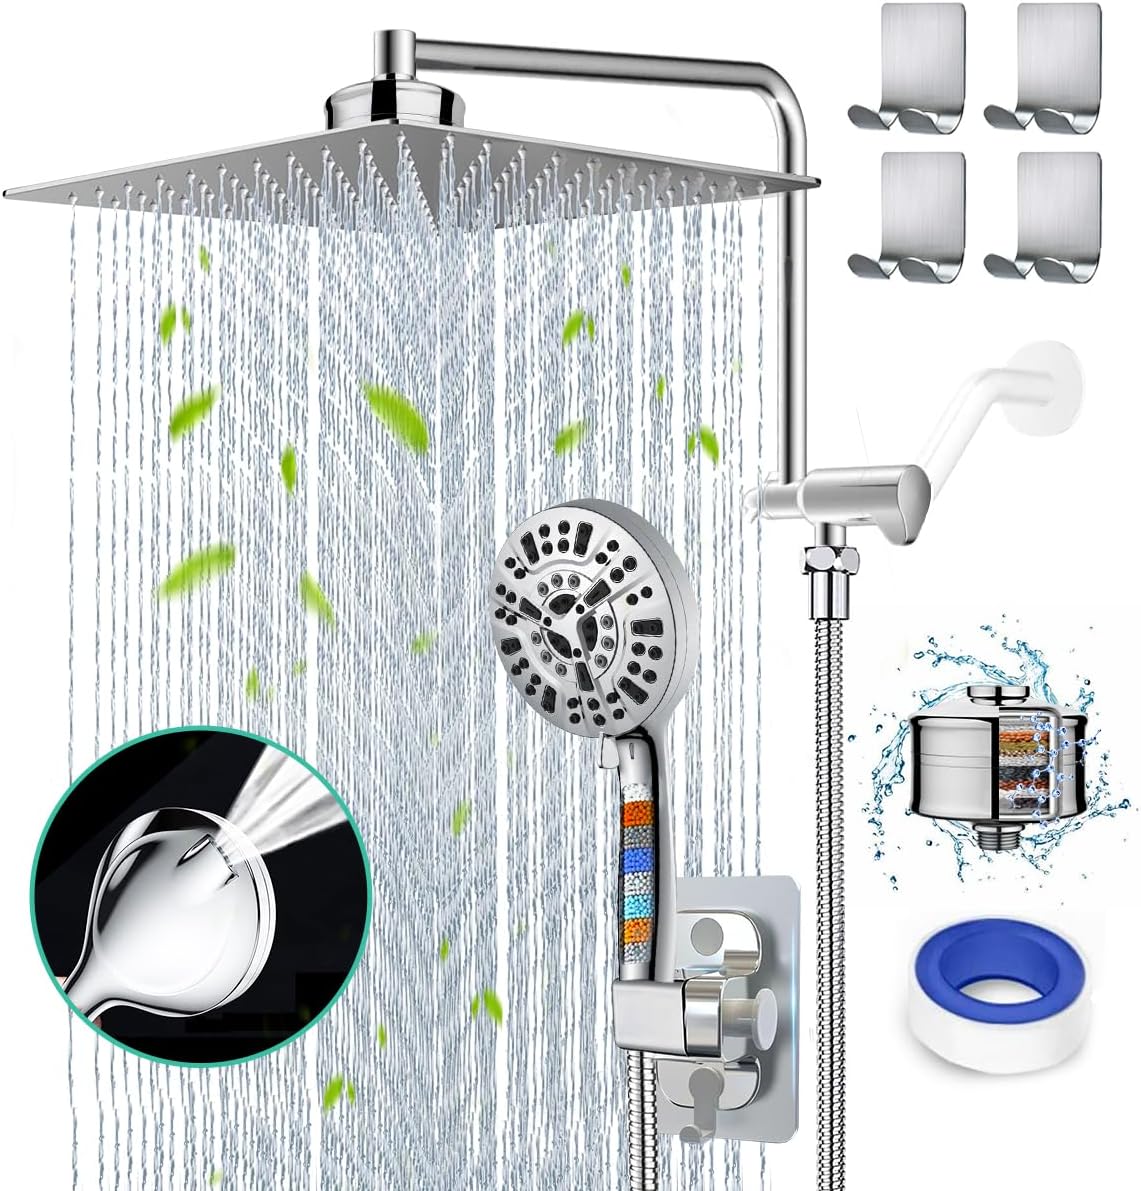 Filtered Shower Head 12 Rain Shower Heads with Handheld Spray Combo 10 Settings Built-in 2 Power Wash, Dual Filter for Hard Water Rainfall Showerhead +12 Shower Extension Arm, 79 Hose & 4 Hooks